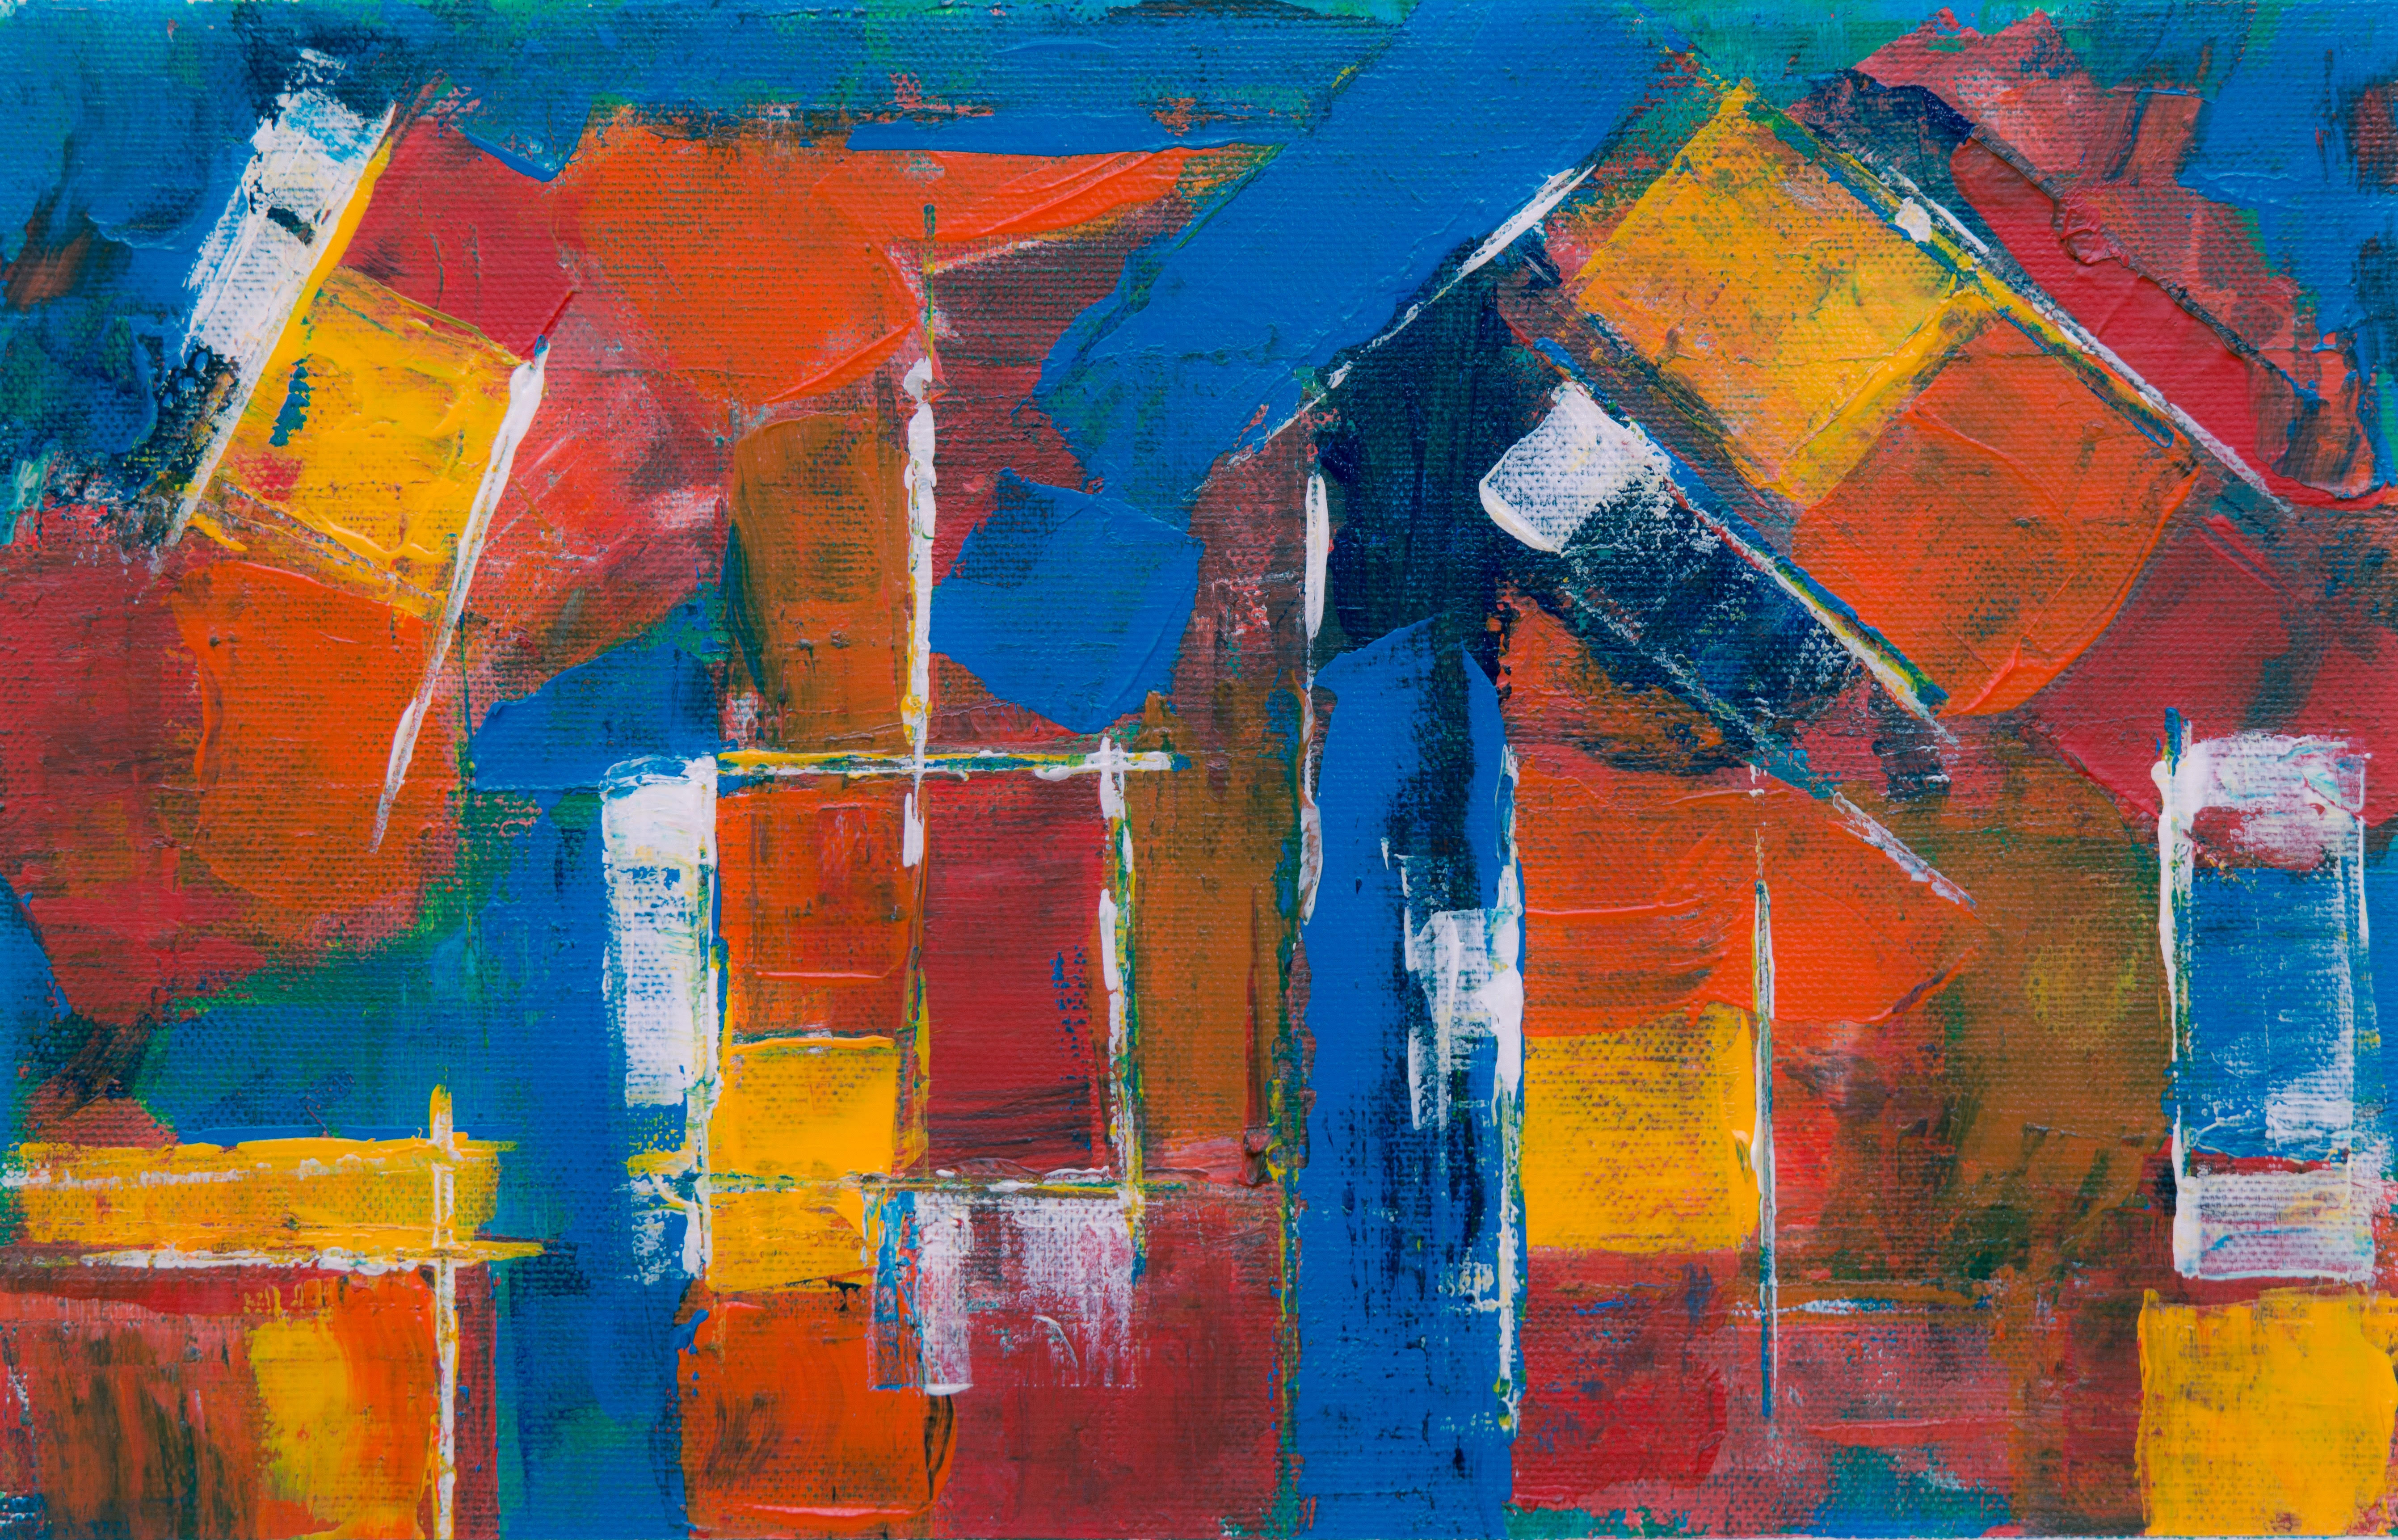 a painting featuring red, orange, and yellow squares on a blue background